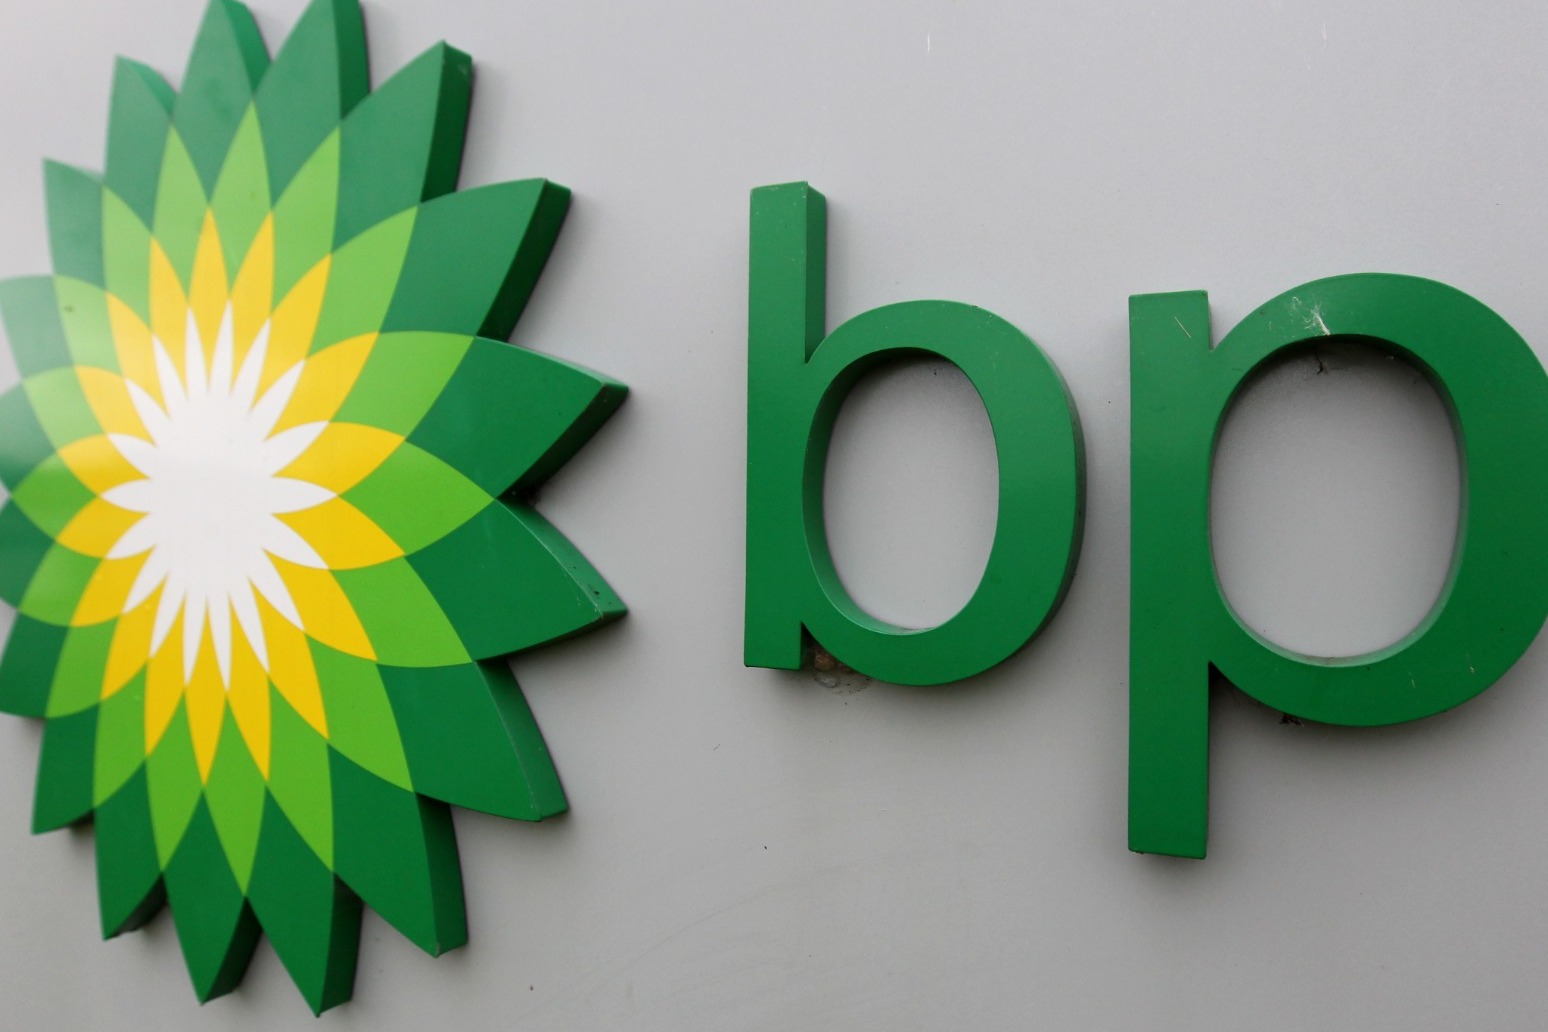 BP profits more than double to £7.1bn amid windfall tax pressure 